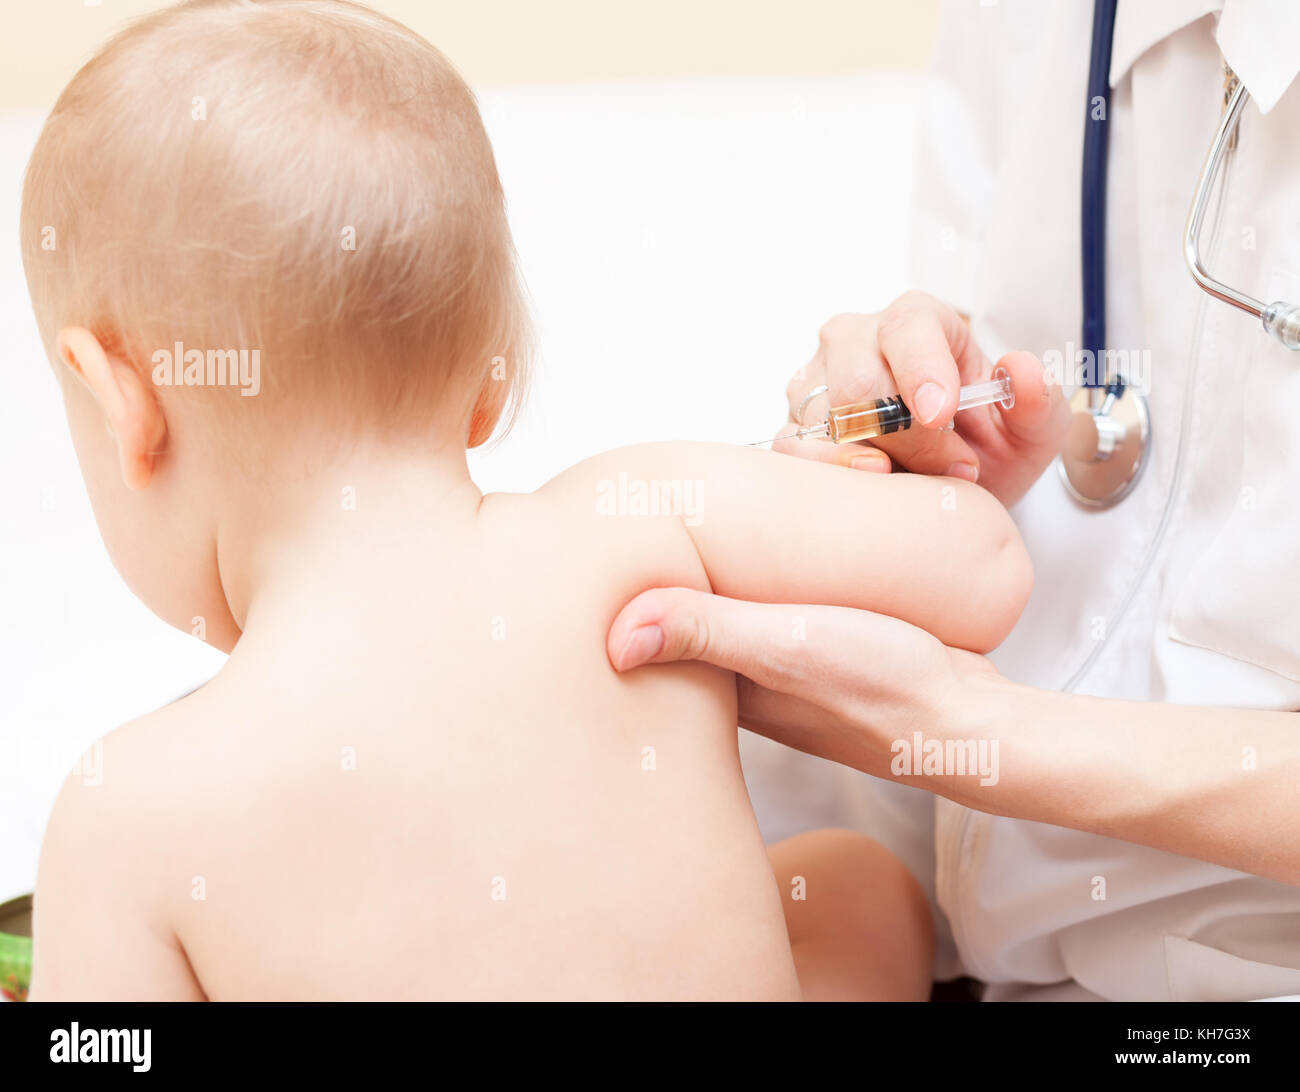 Close-up shot of pediatrician ready to give an intramuscular injection of a vaccine to a baby girl Stock Photo